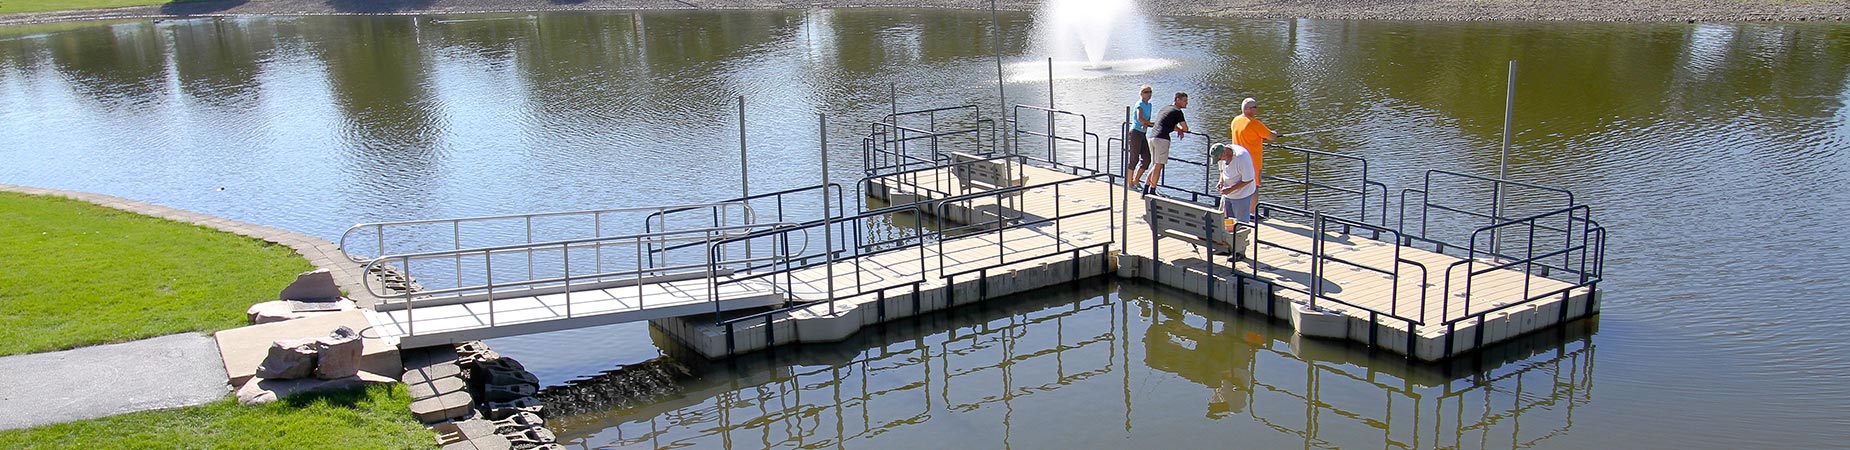 Wide angle view of floating dock with railings